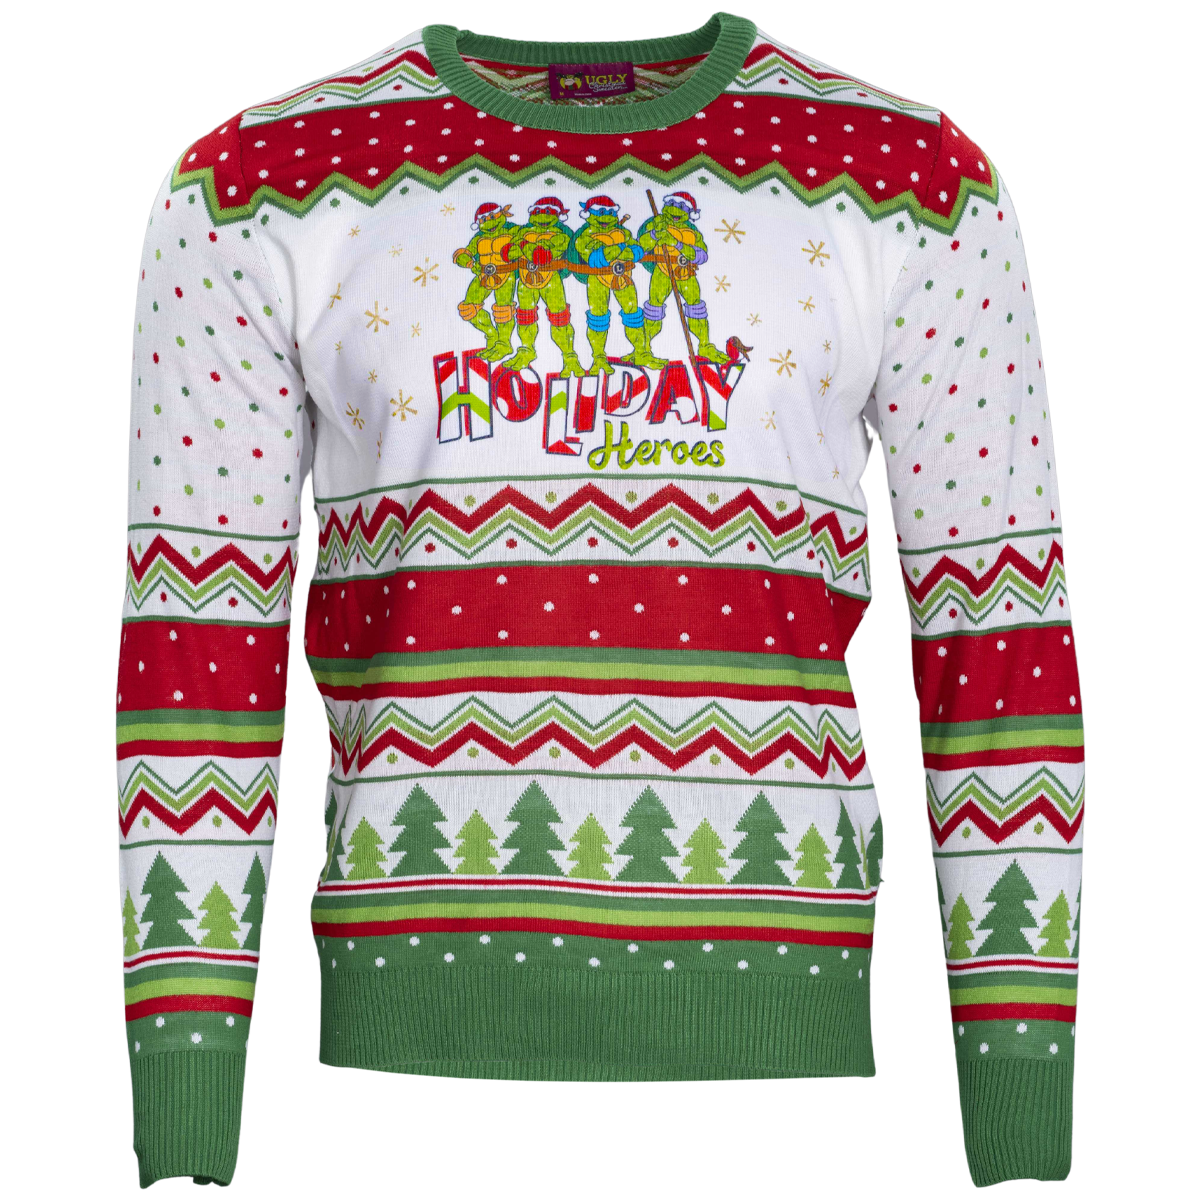 Holiday Heroes TMNT Christmas Sweater